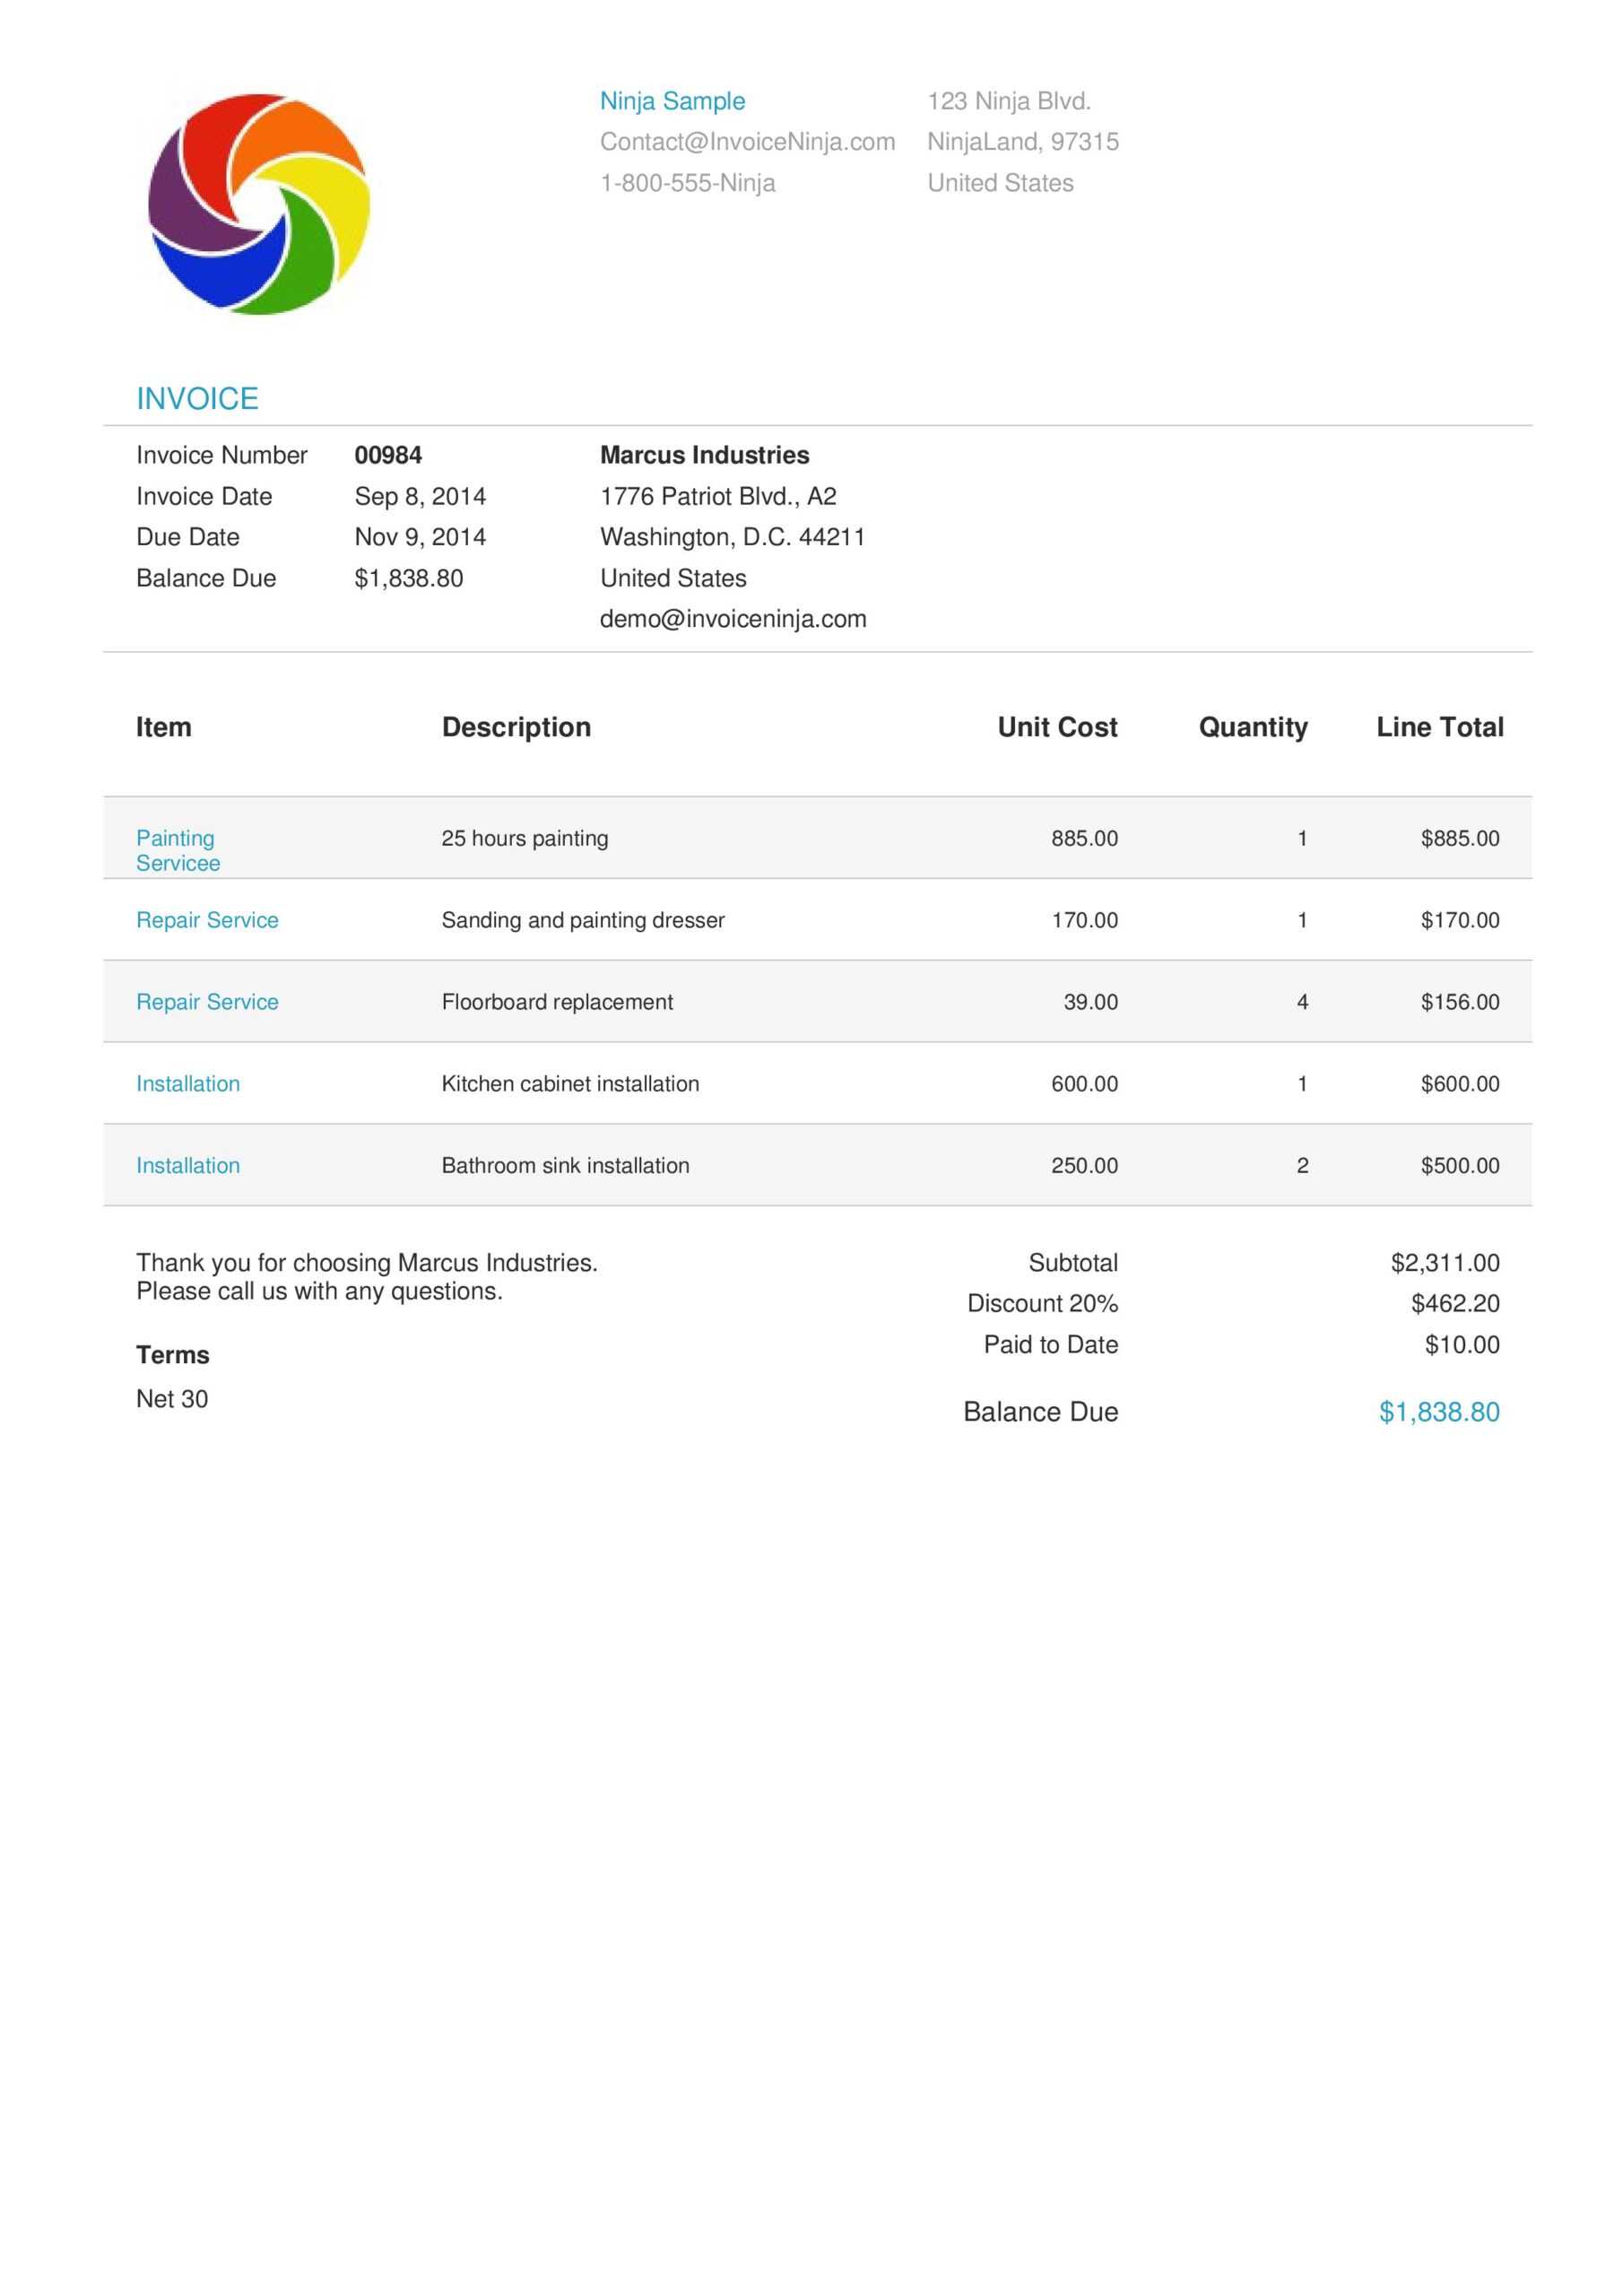 Invoice & Quotation Template Designs | Invoice Ninja Within Free Invoice Template For Android